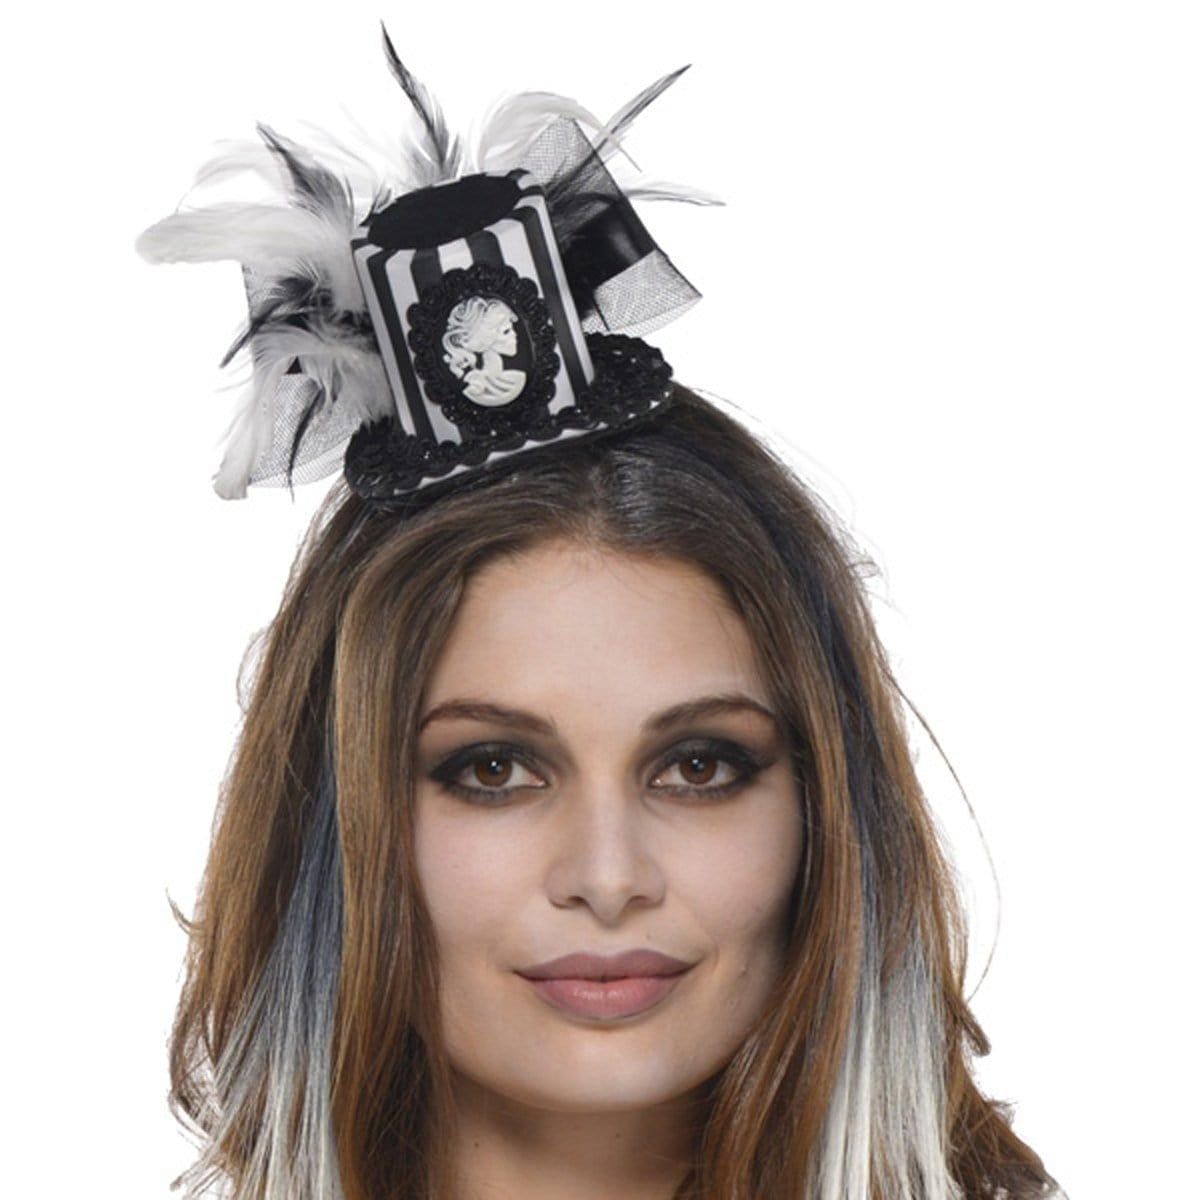 Buy Costume Accessories Bone deluxe fashion mini hat for adults sold at Party Expert